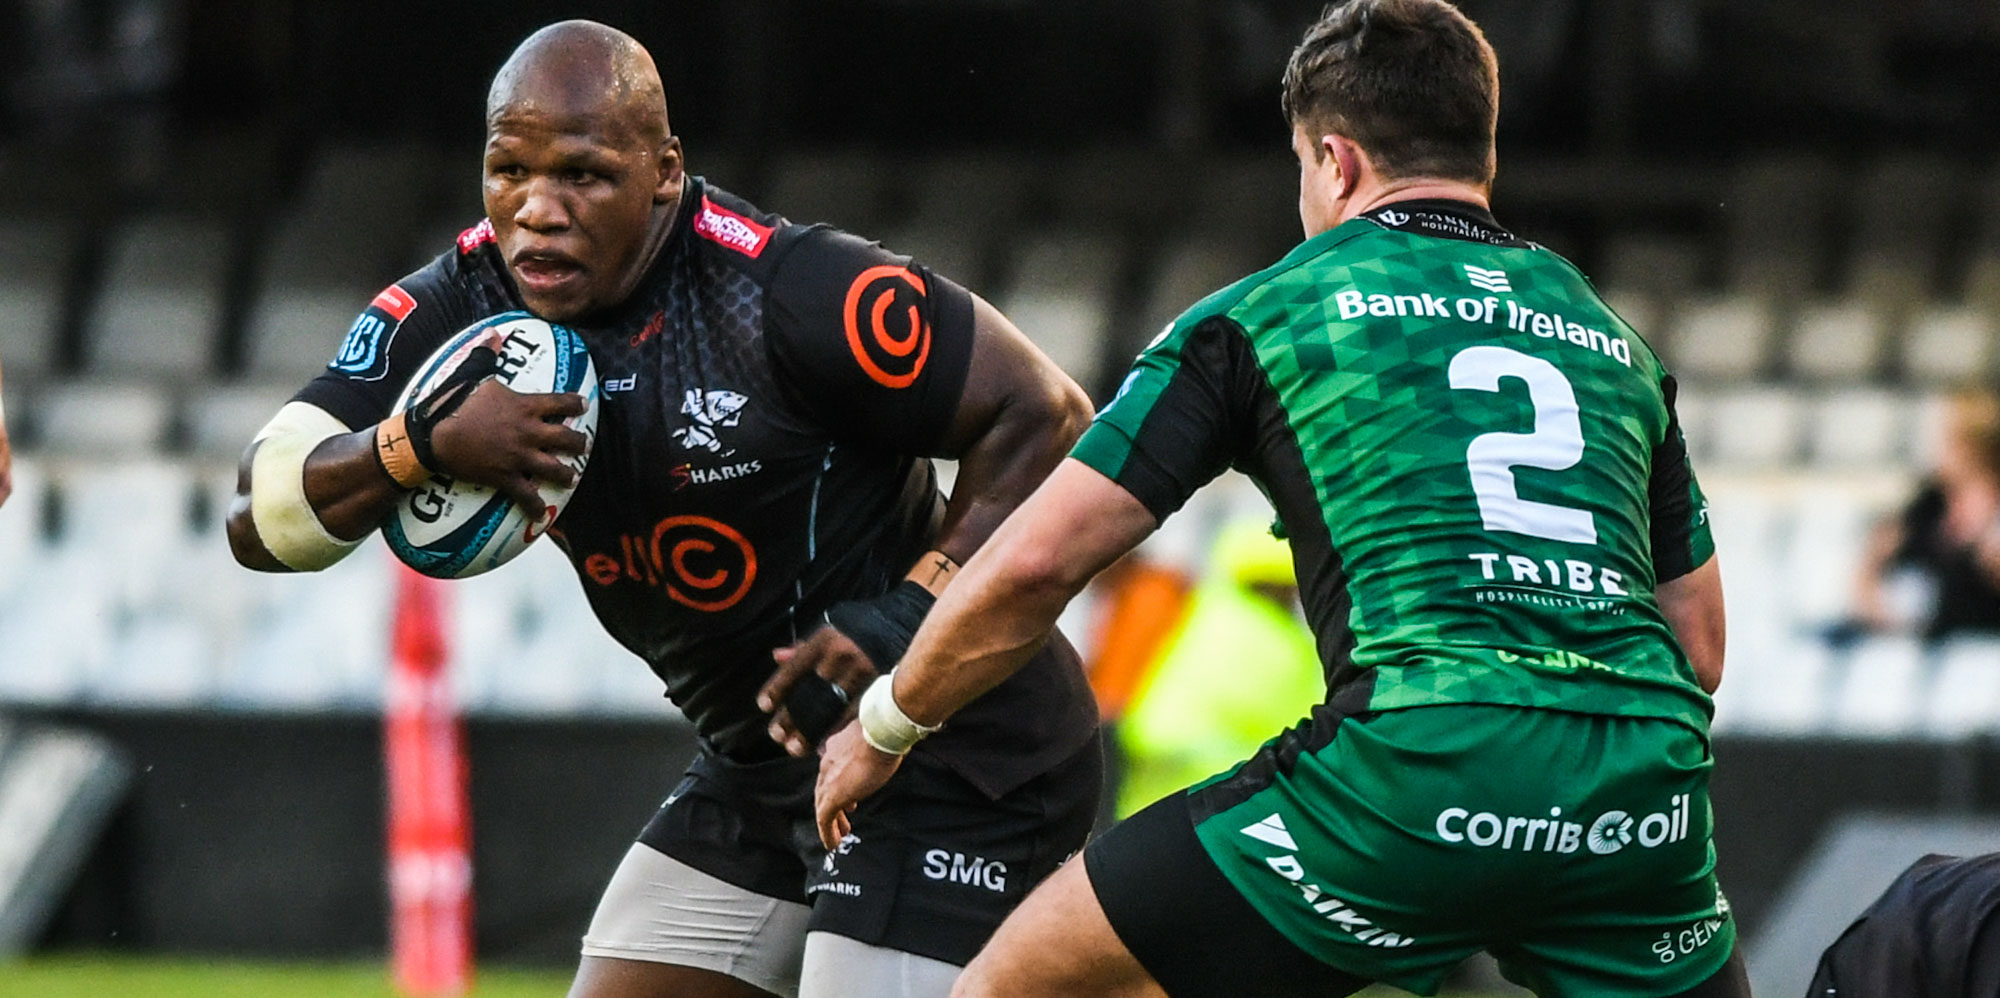 Bongi Mbonambi scored one of the Cell C Sharks' tries against Connacht.